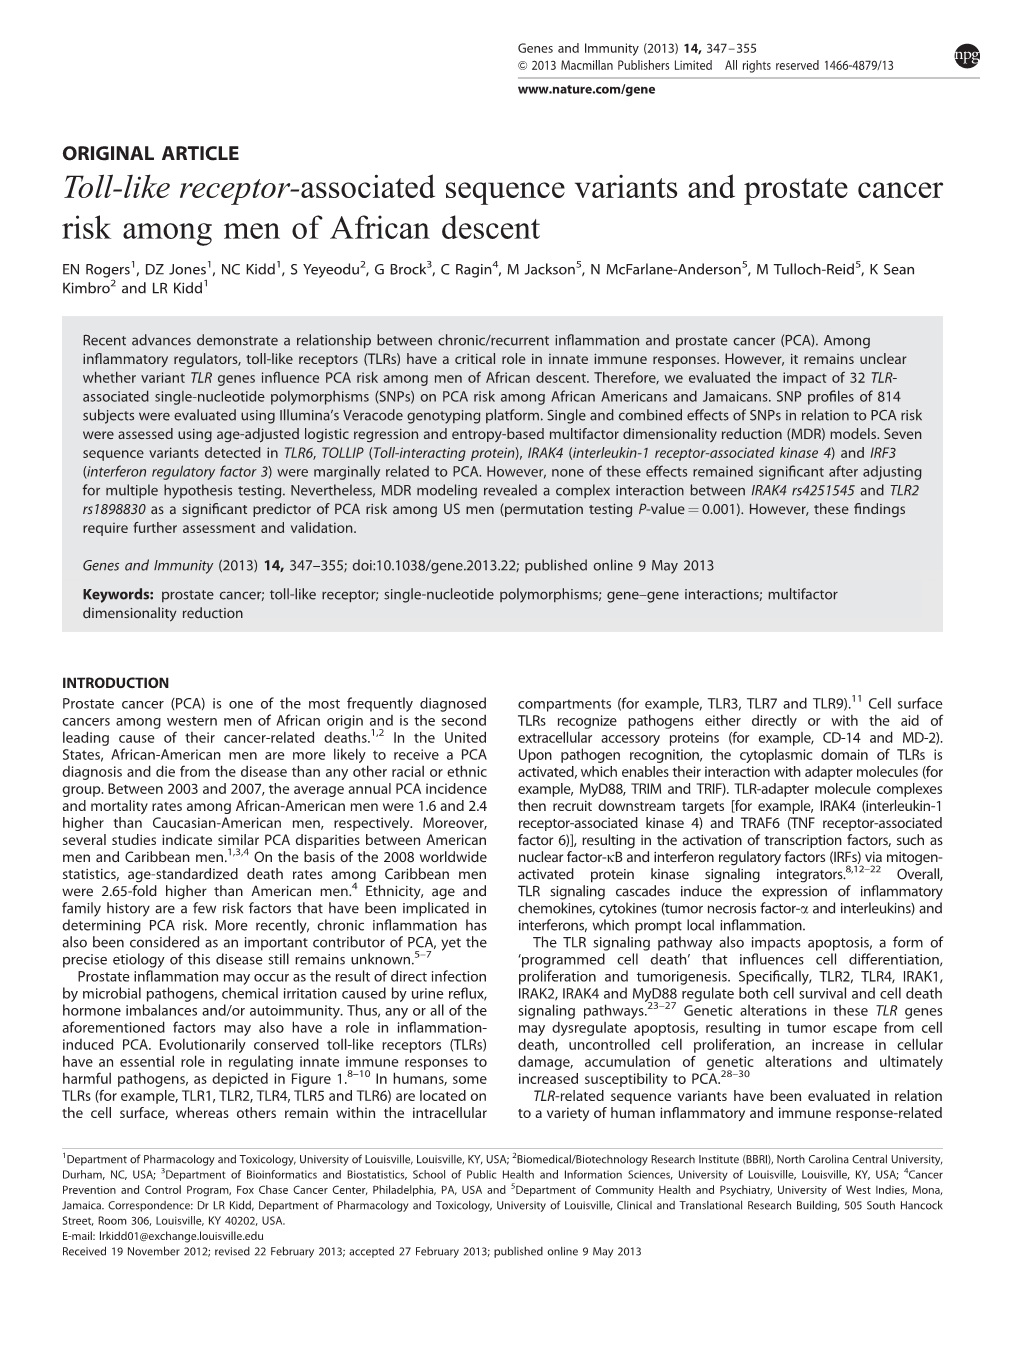 Toll-Like Receptor-Associated Sequence Variants and Prostate Cancer Risk Among Men of African Descent